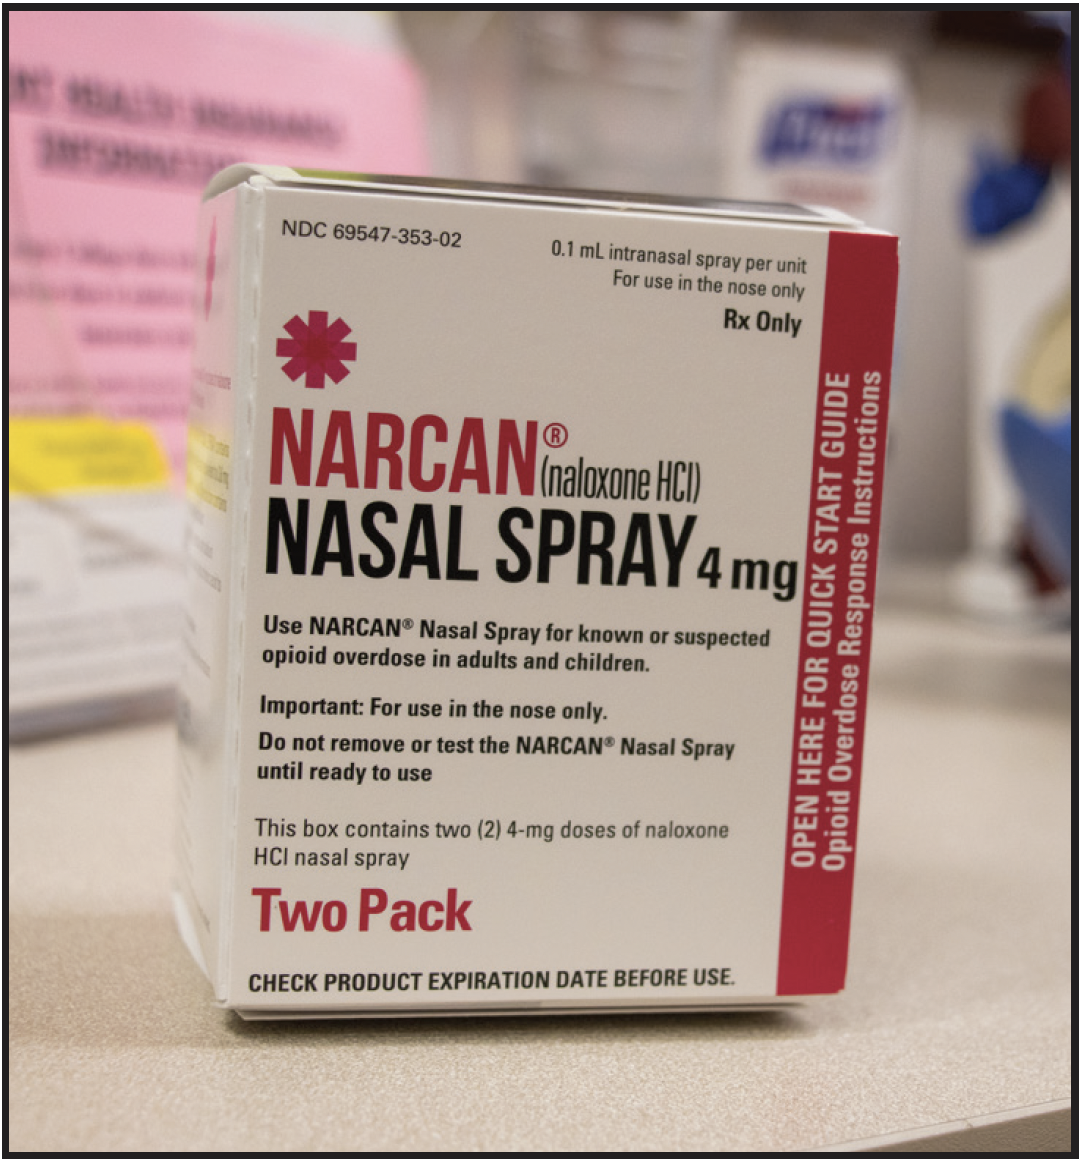 Narcan is only available in the health
services office for emergency use.